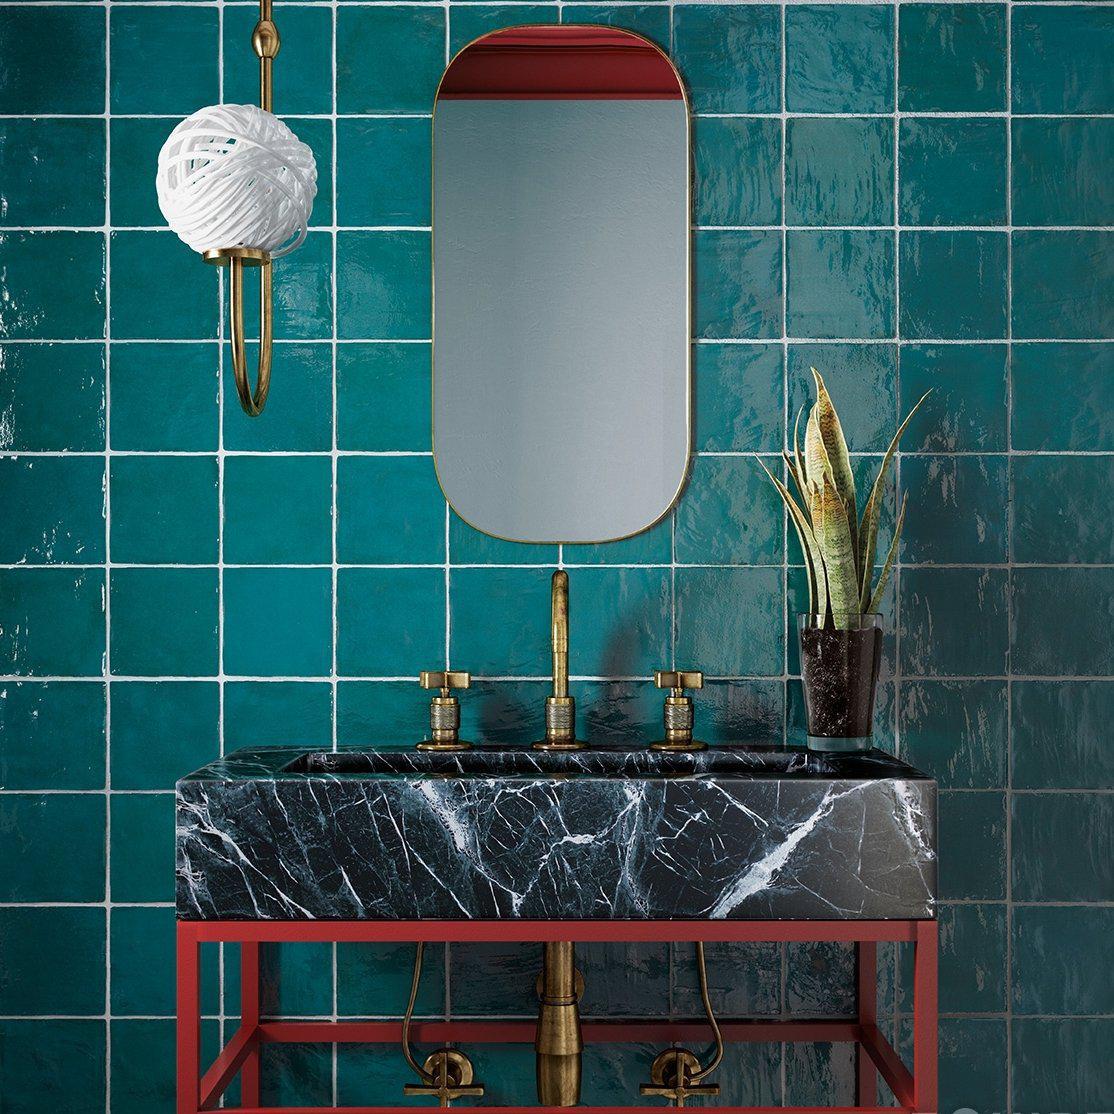 La Riviera Quetzal Ceramic Tile in Jewel Tone Green with a Modern Marble Farm Sink and Gold Bathroom Fixtures